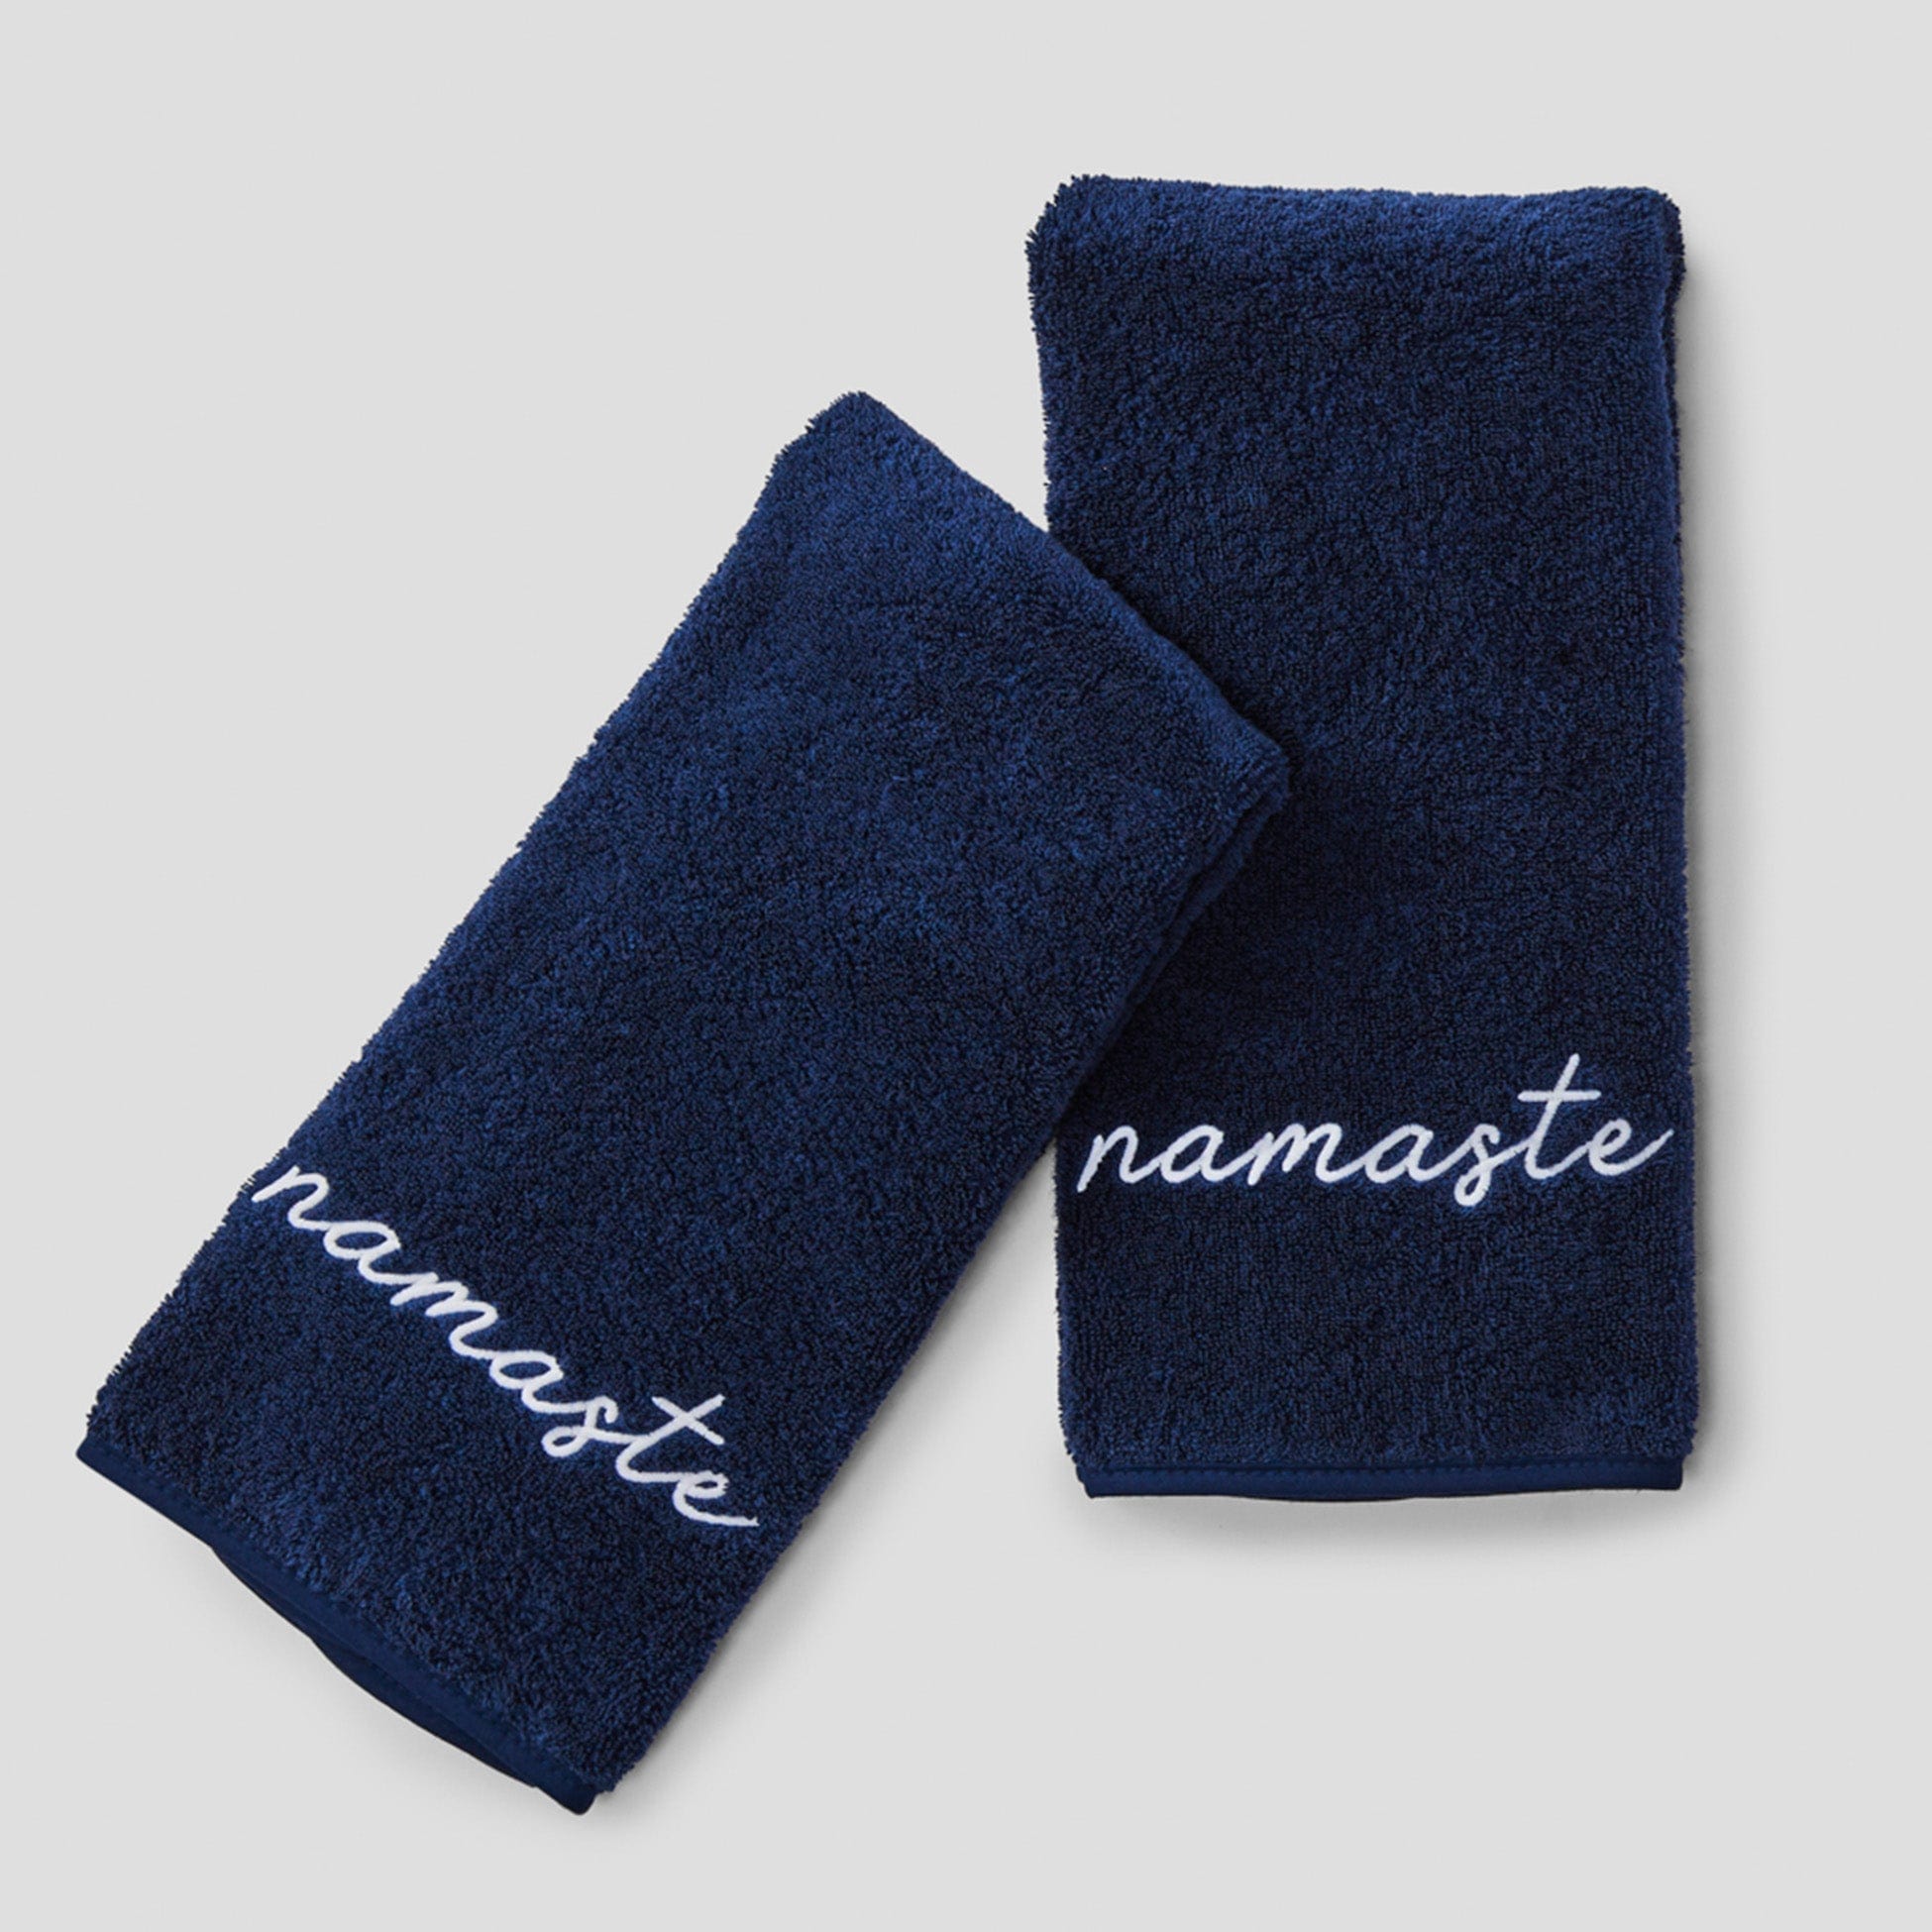 embroidered gym towels